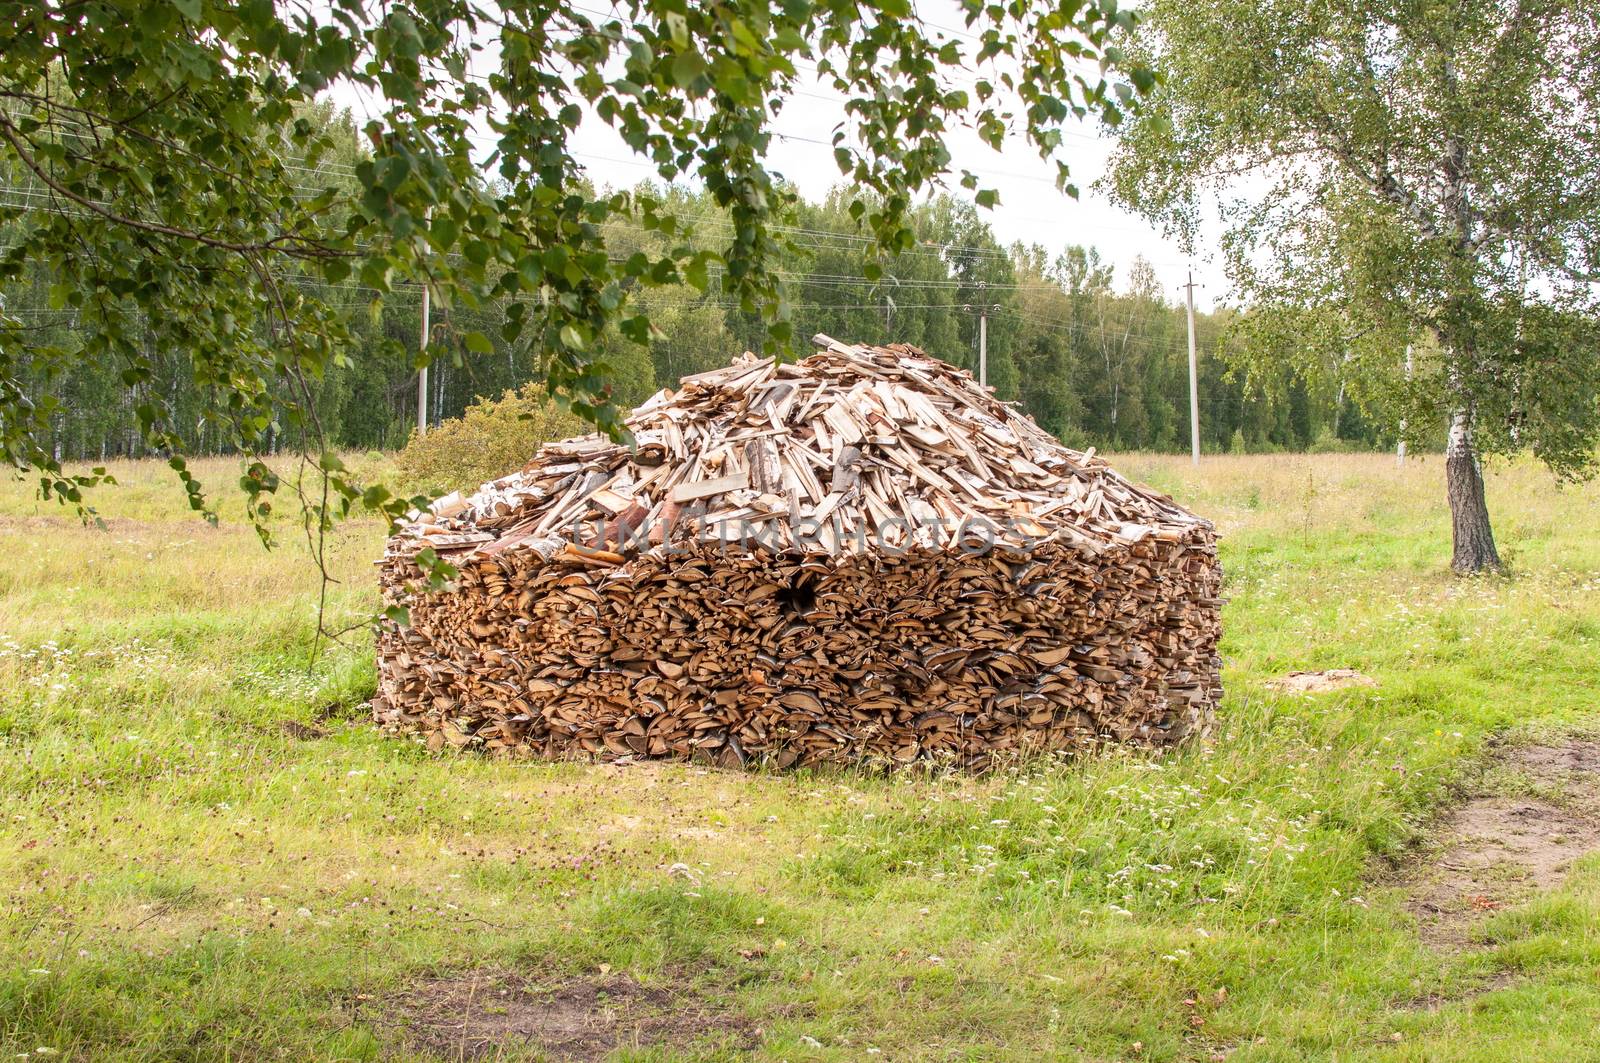 Stack of Cleaving Birch Firewood in Forest Glade on the Village Outskirts, Western Siberia, Russia